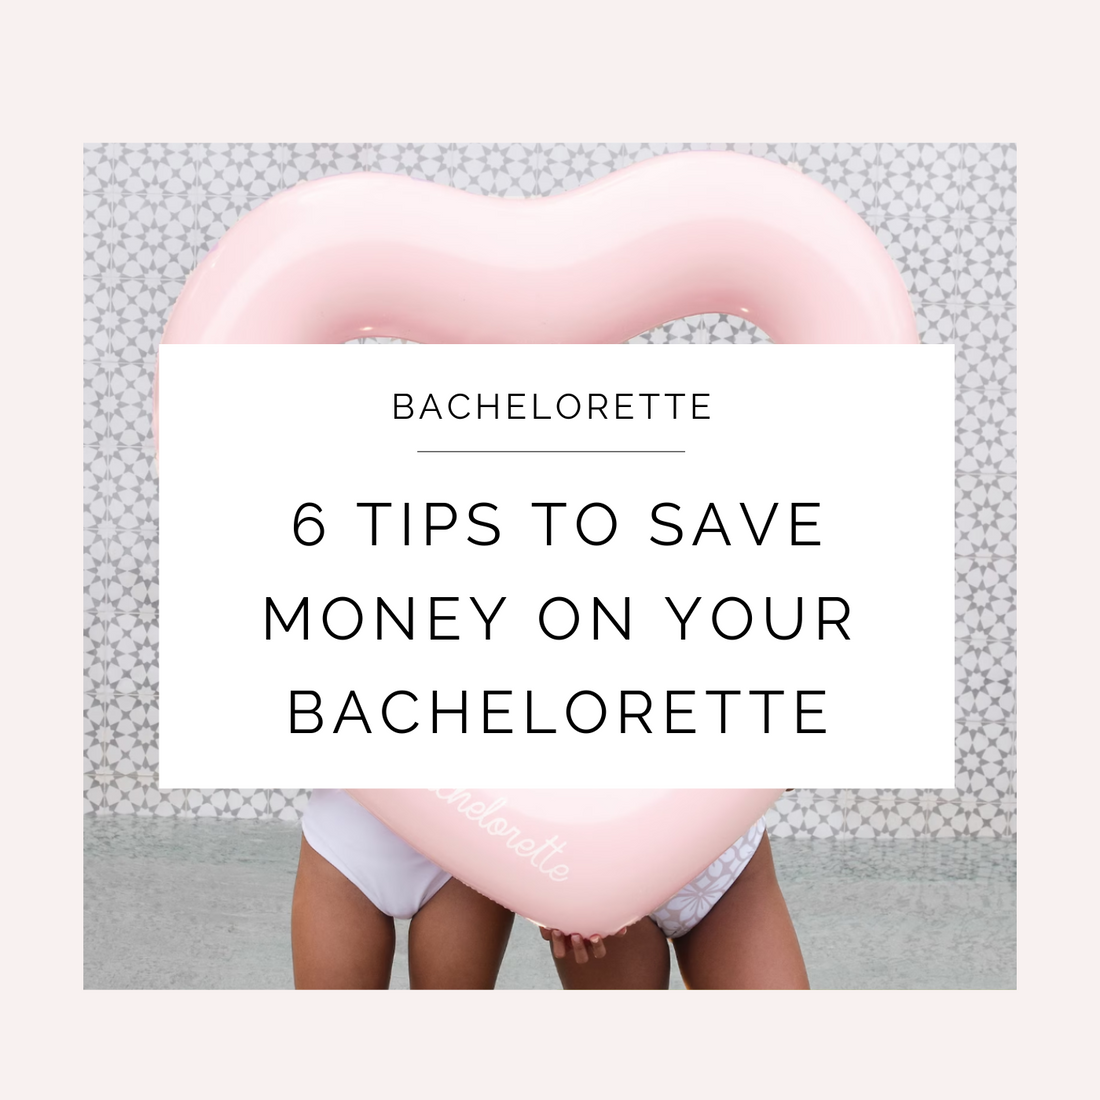 6 Tips To Save Money on Your Bachelorette Party